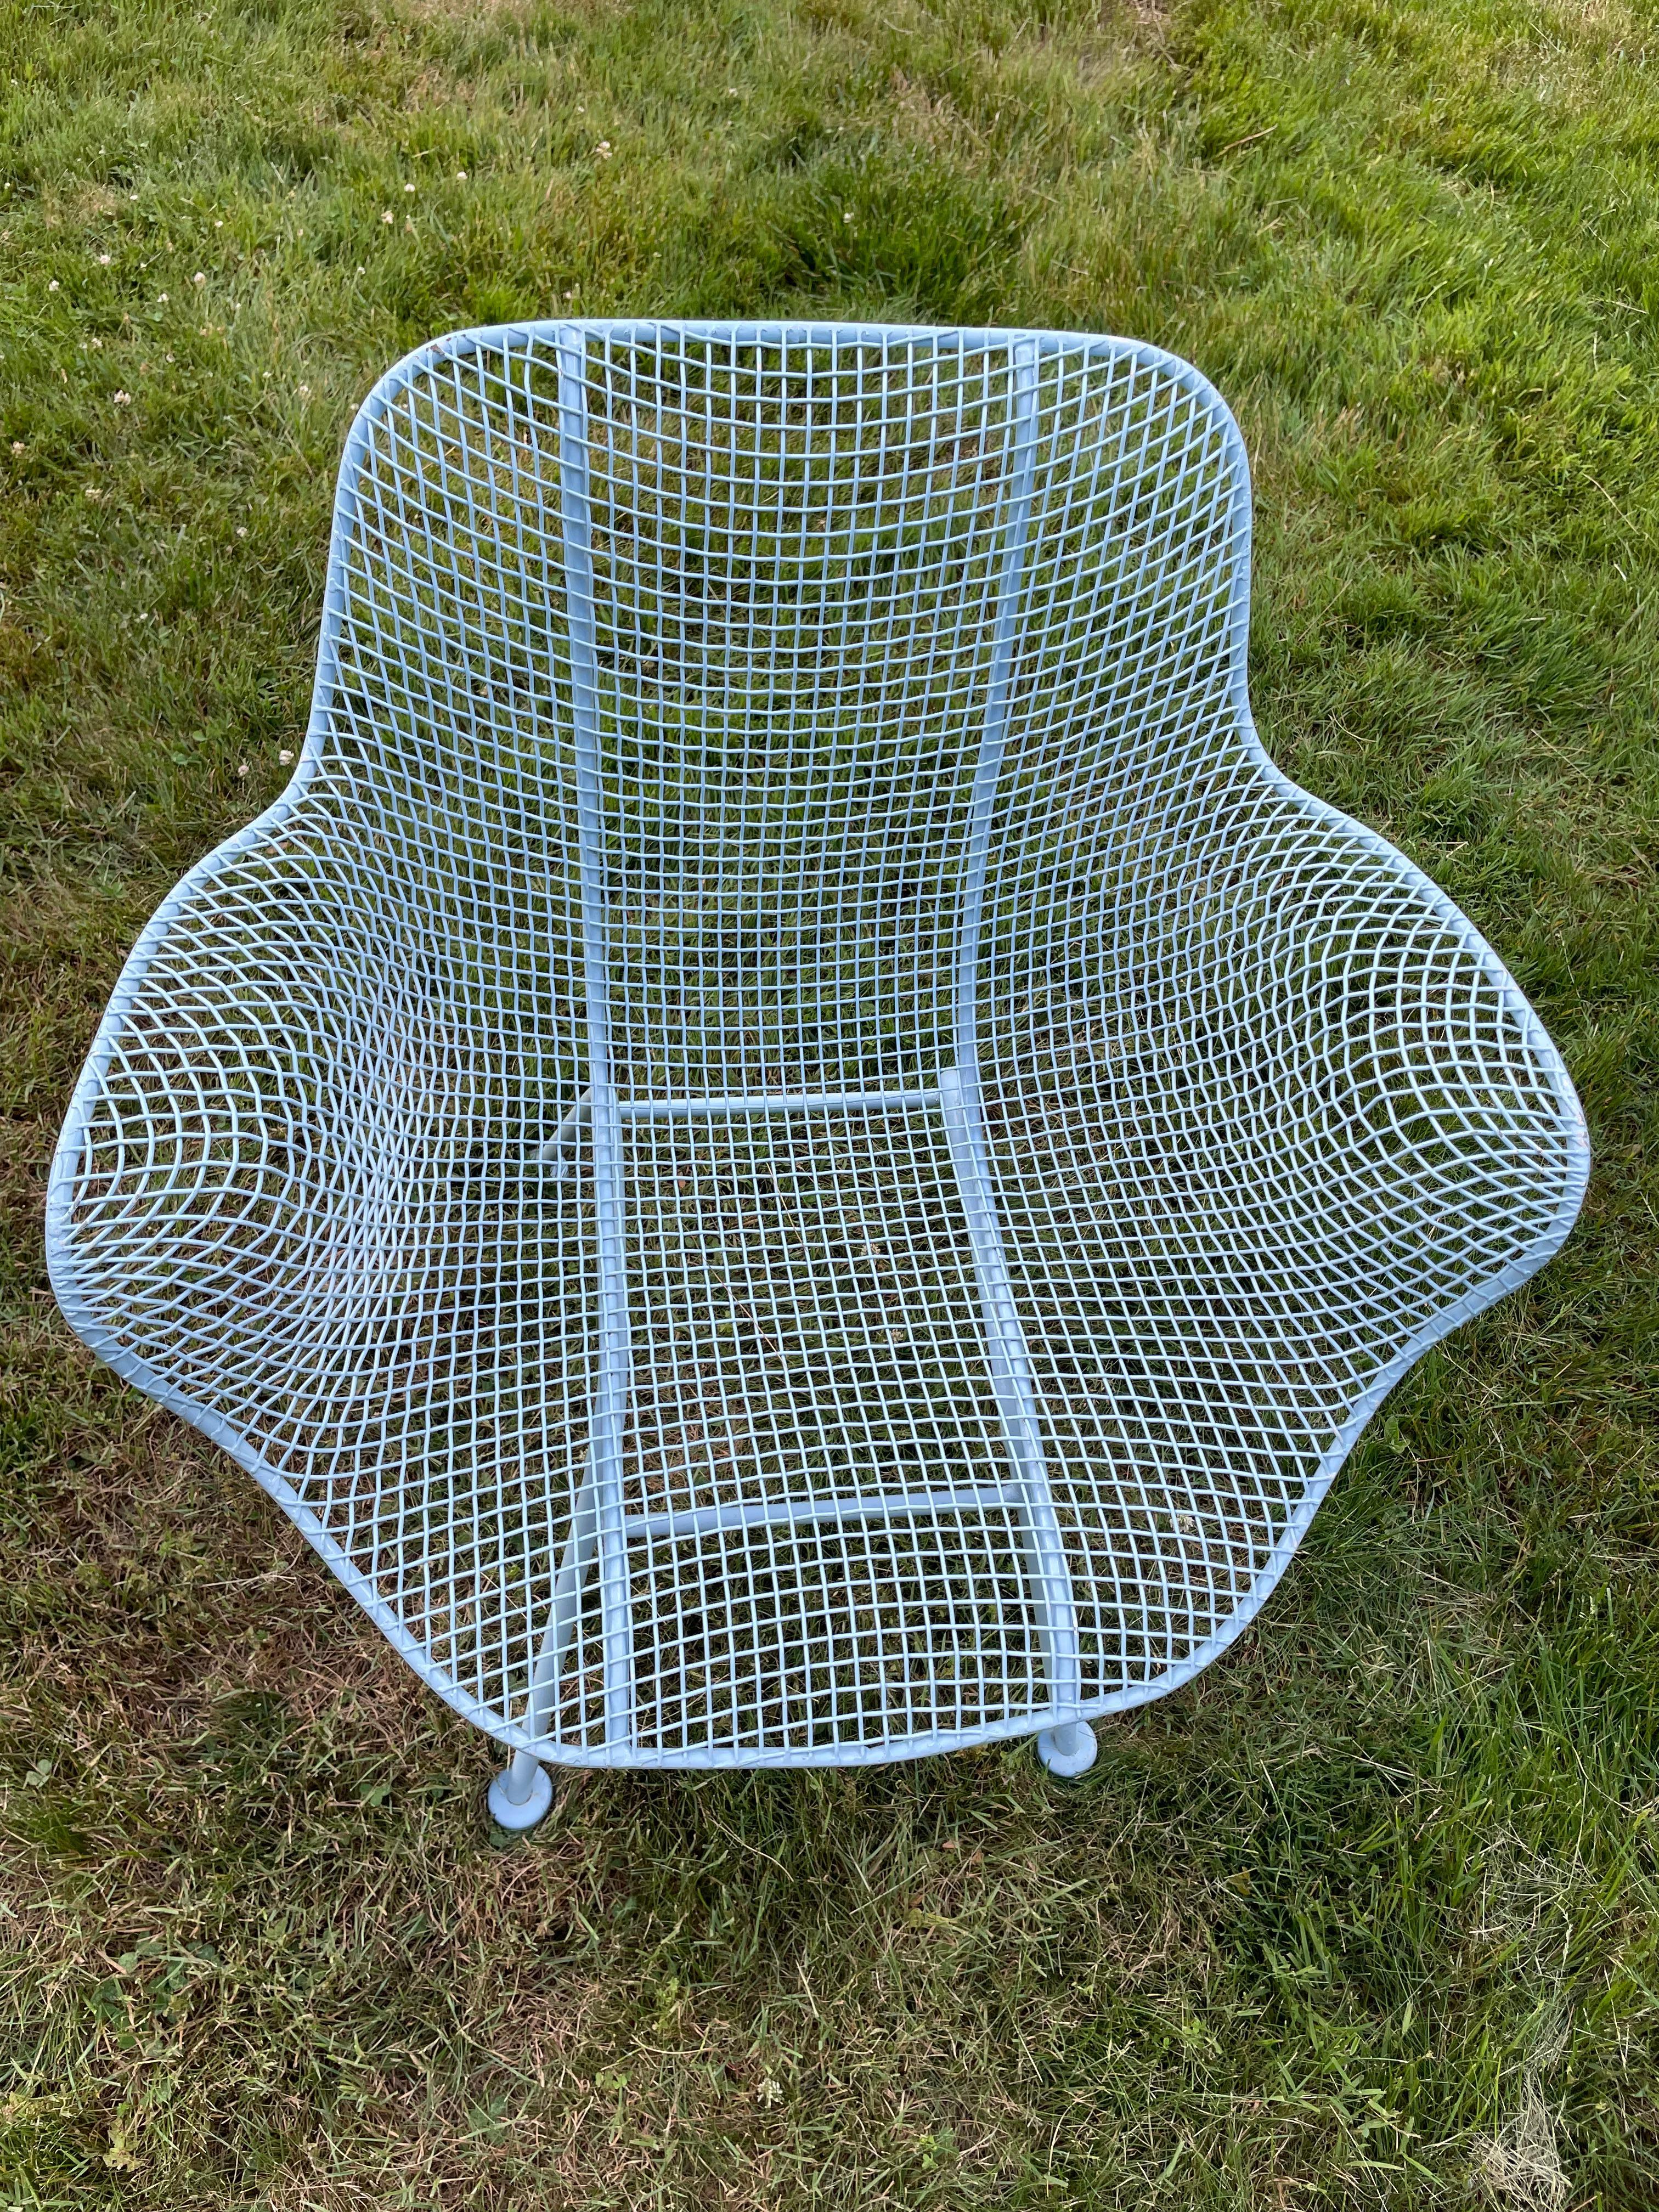 Wonderful and hard-to-find color of circa 1950's Russell Woodard's iconic Sculptura series outdoor chairs, and cocktail table. This iconic wrought iron and steel mesh grouping from Russell Woodard's iconic Sculptura series is beautiful and classic,